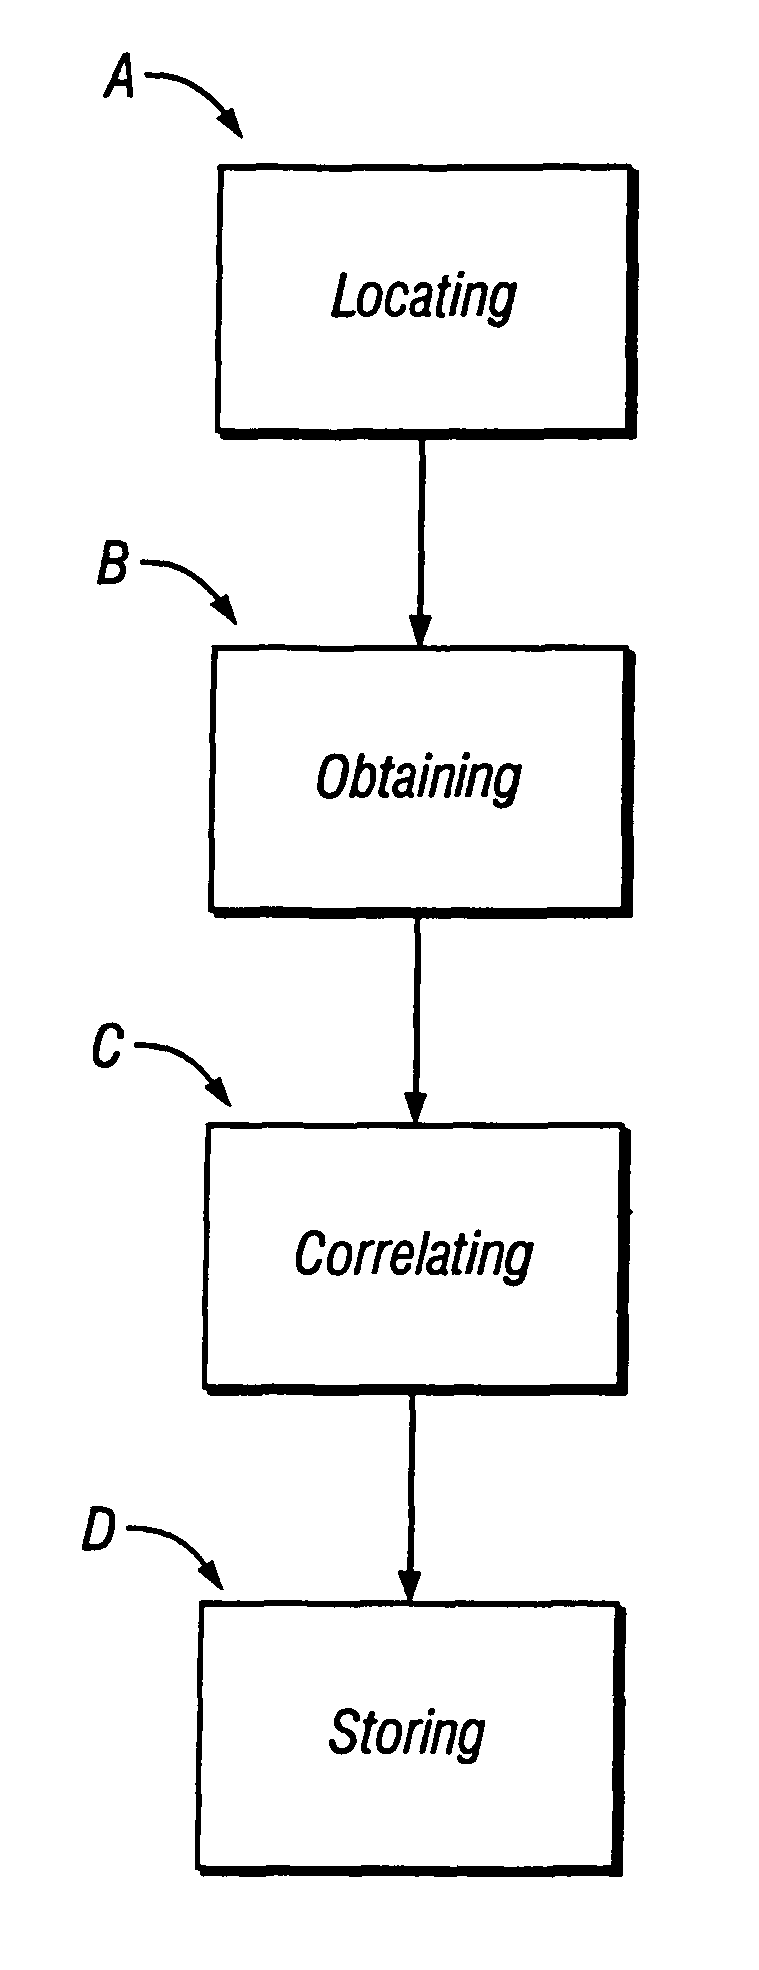 System and method for plant identification